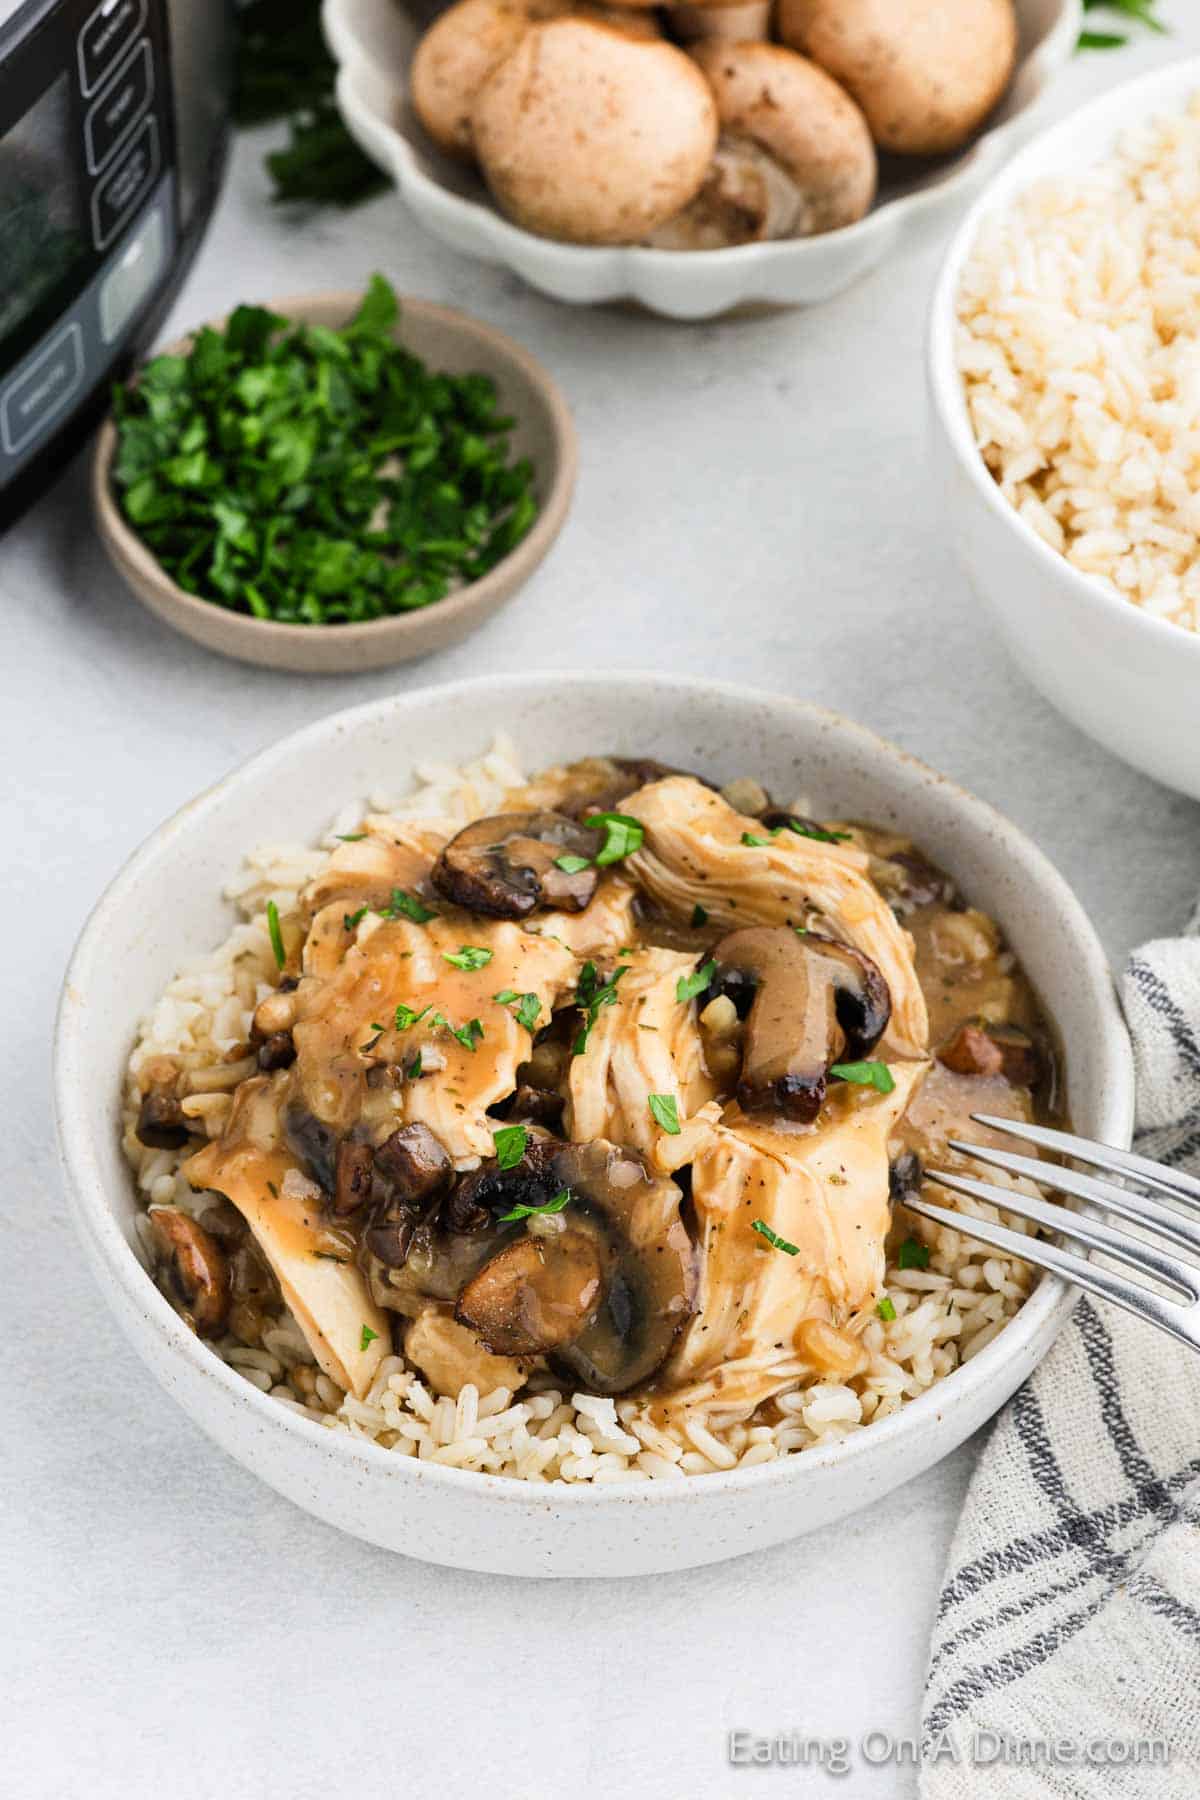 Mushroom Sauce is drizzled over cooked chicken in a bowl of rice